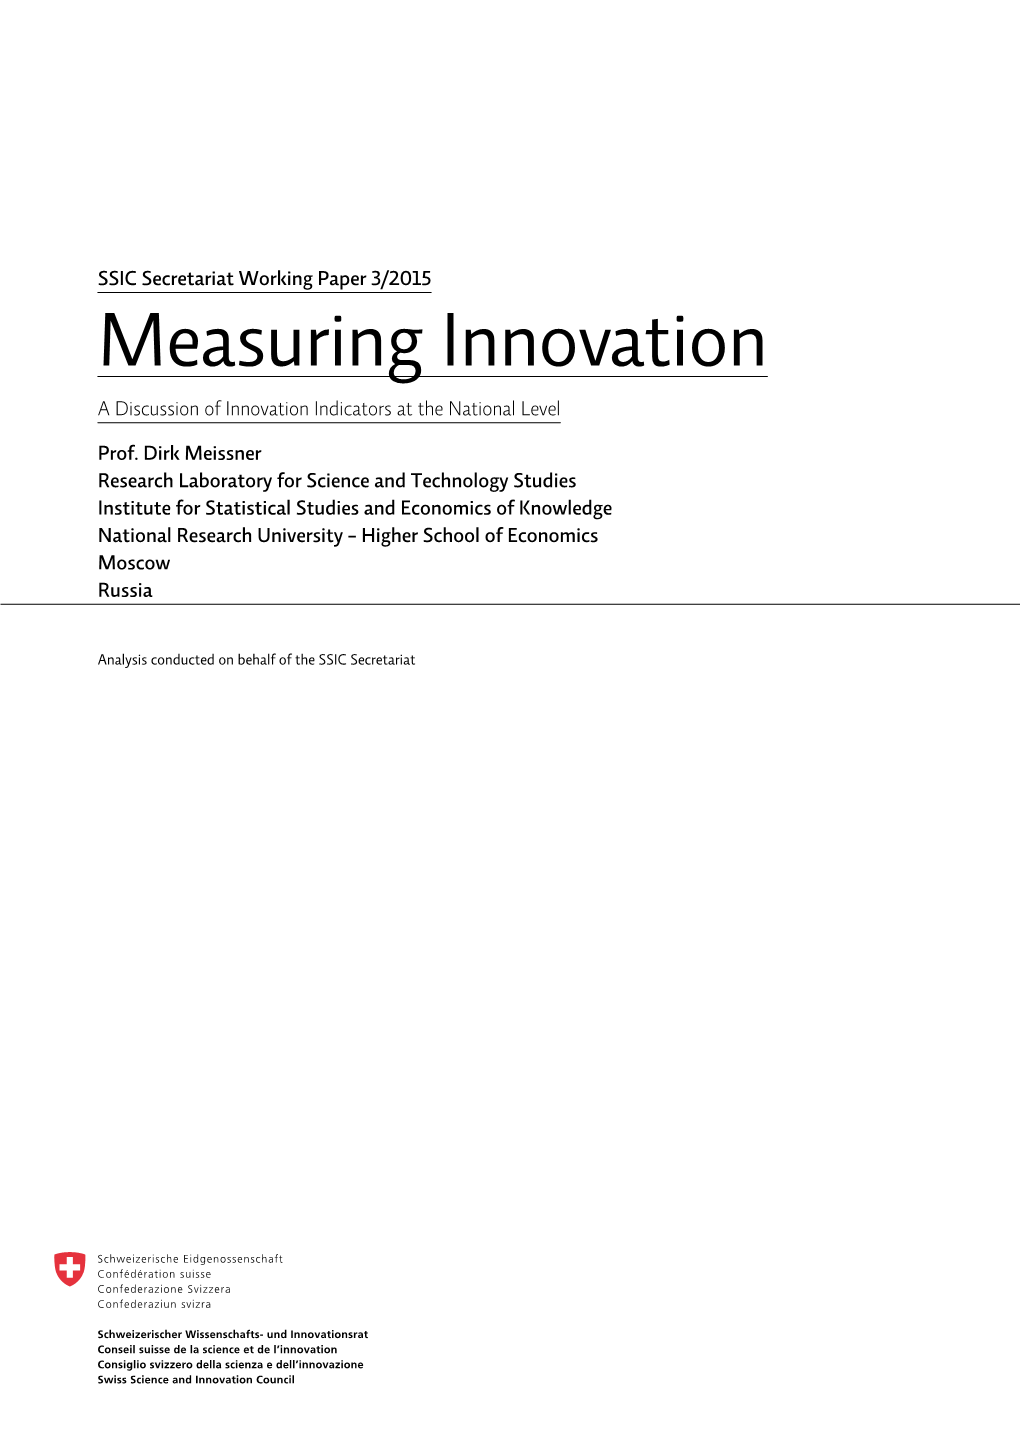 Measuring Innovation a Discussion of Innovation Indicators at the National Level